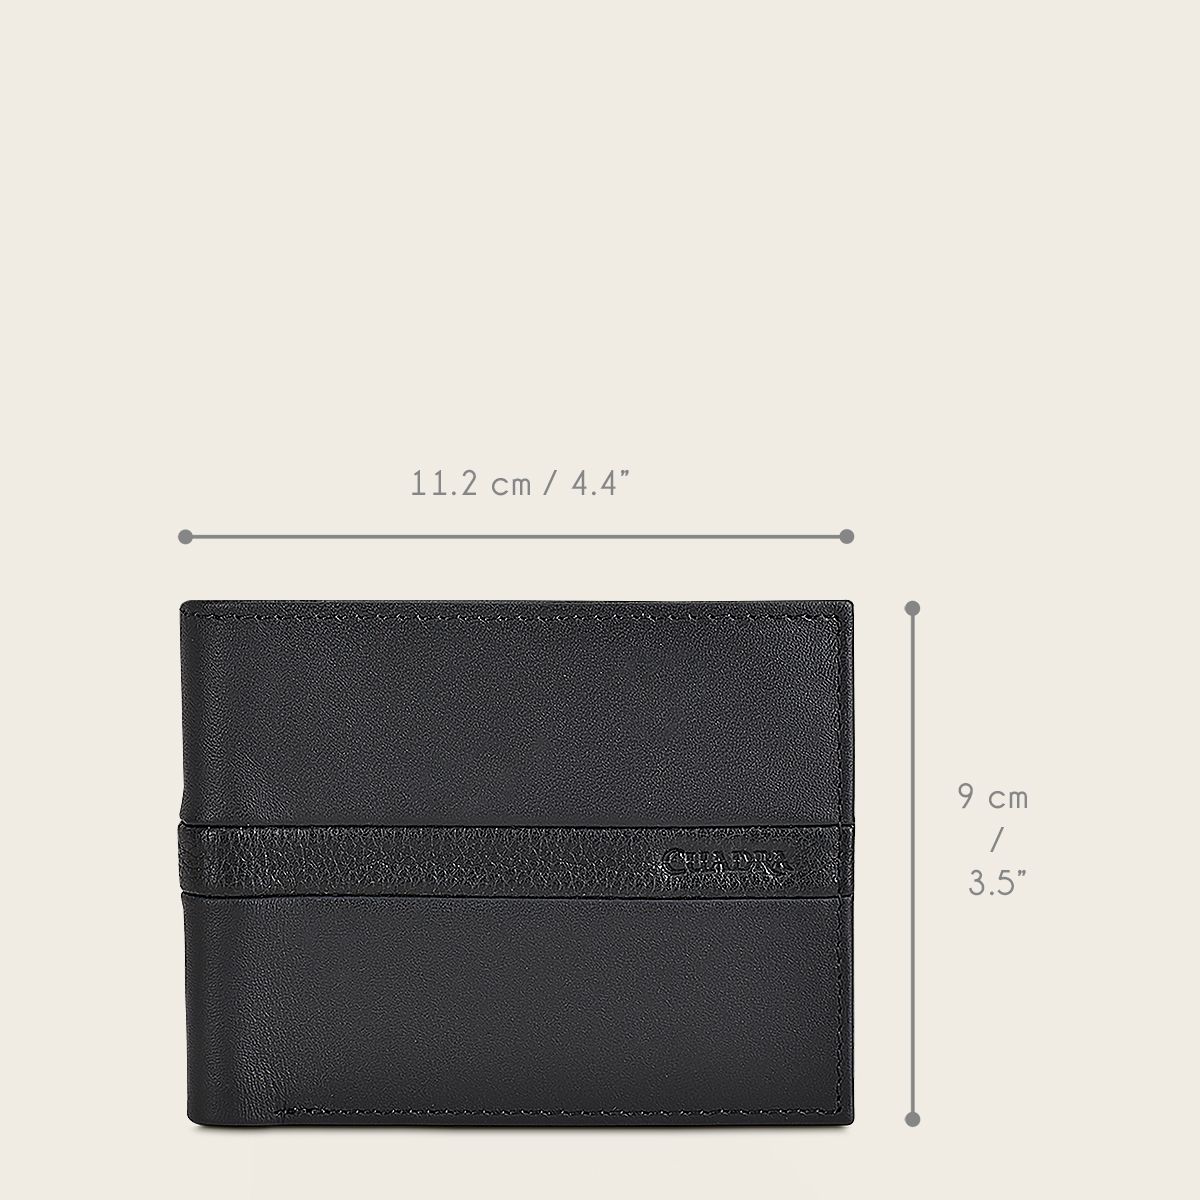 Black bovine leather wallet with contrasting leather strap